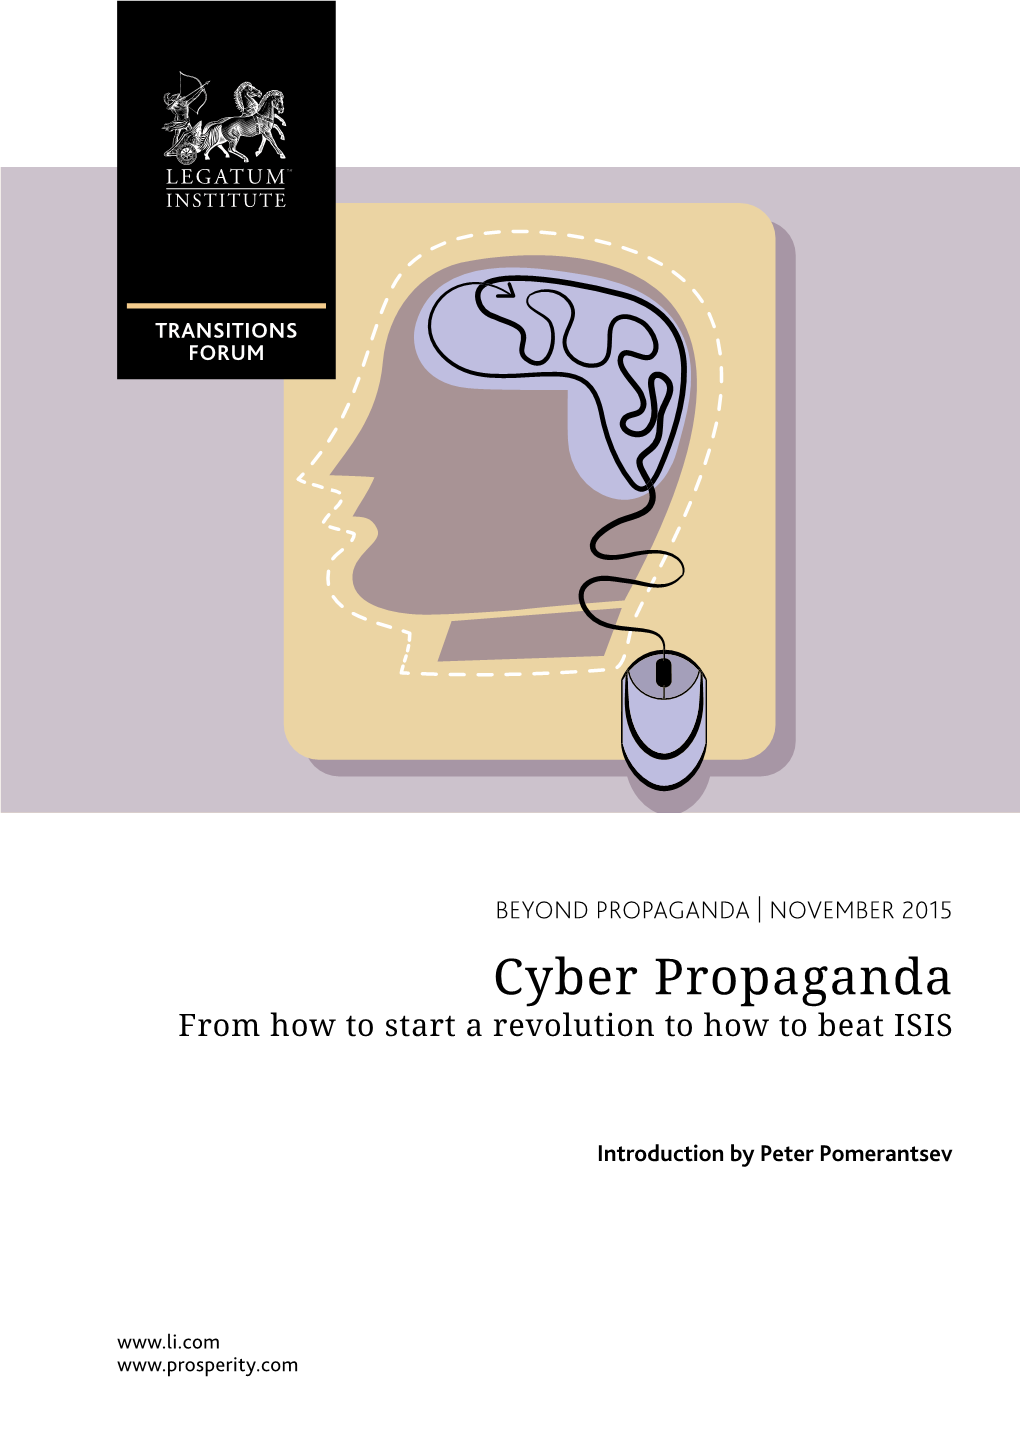 Cyber Propaganda from How to Start a Revolution to How to Beat ISIS